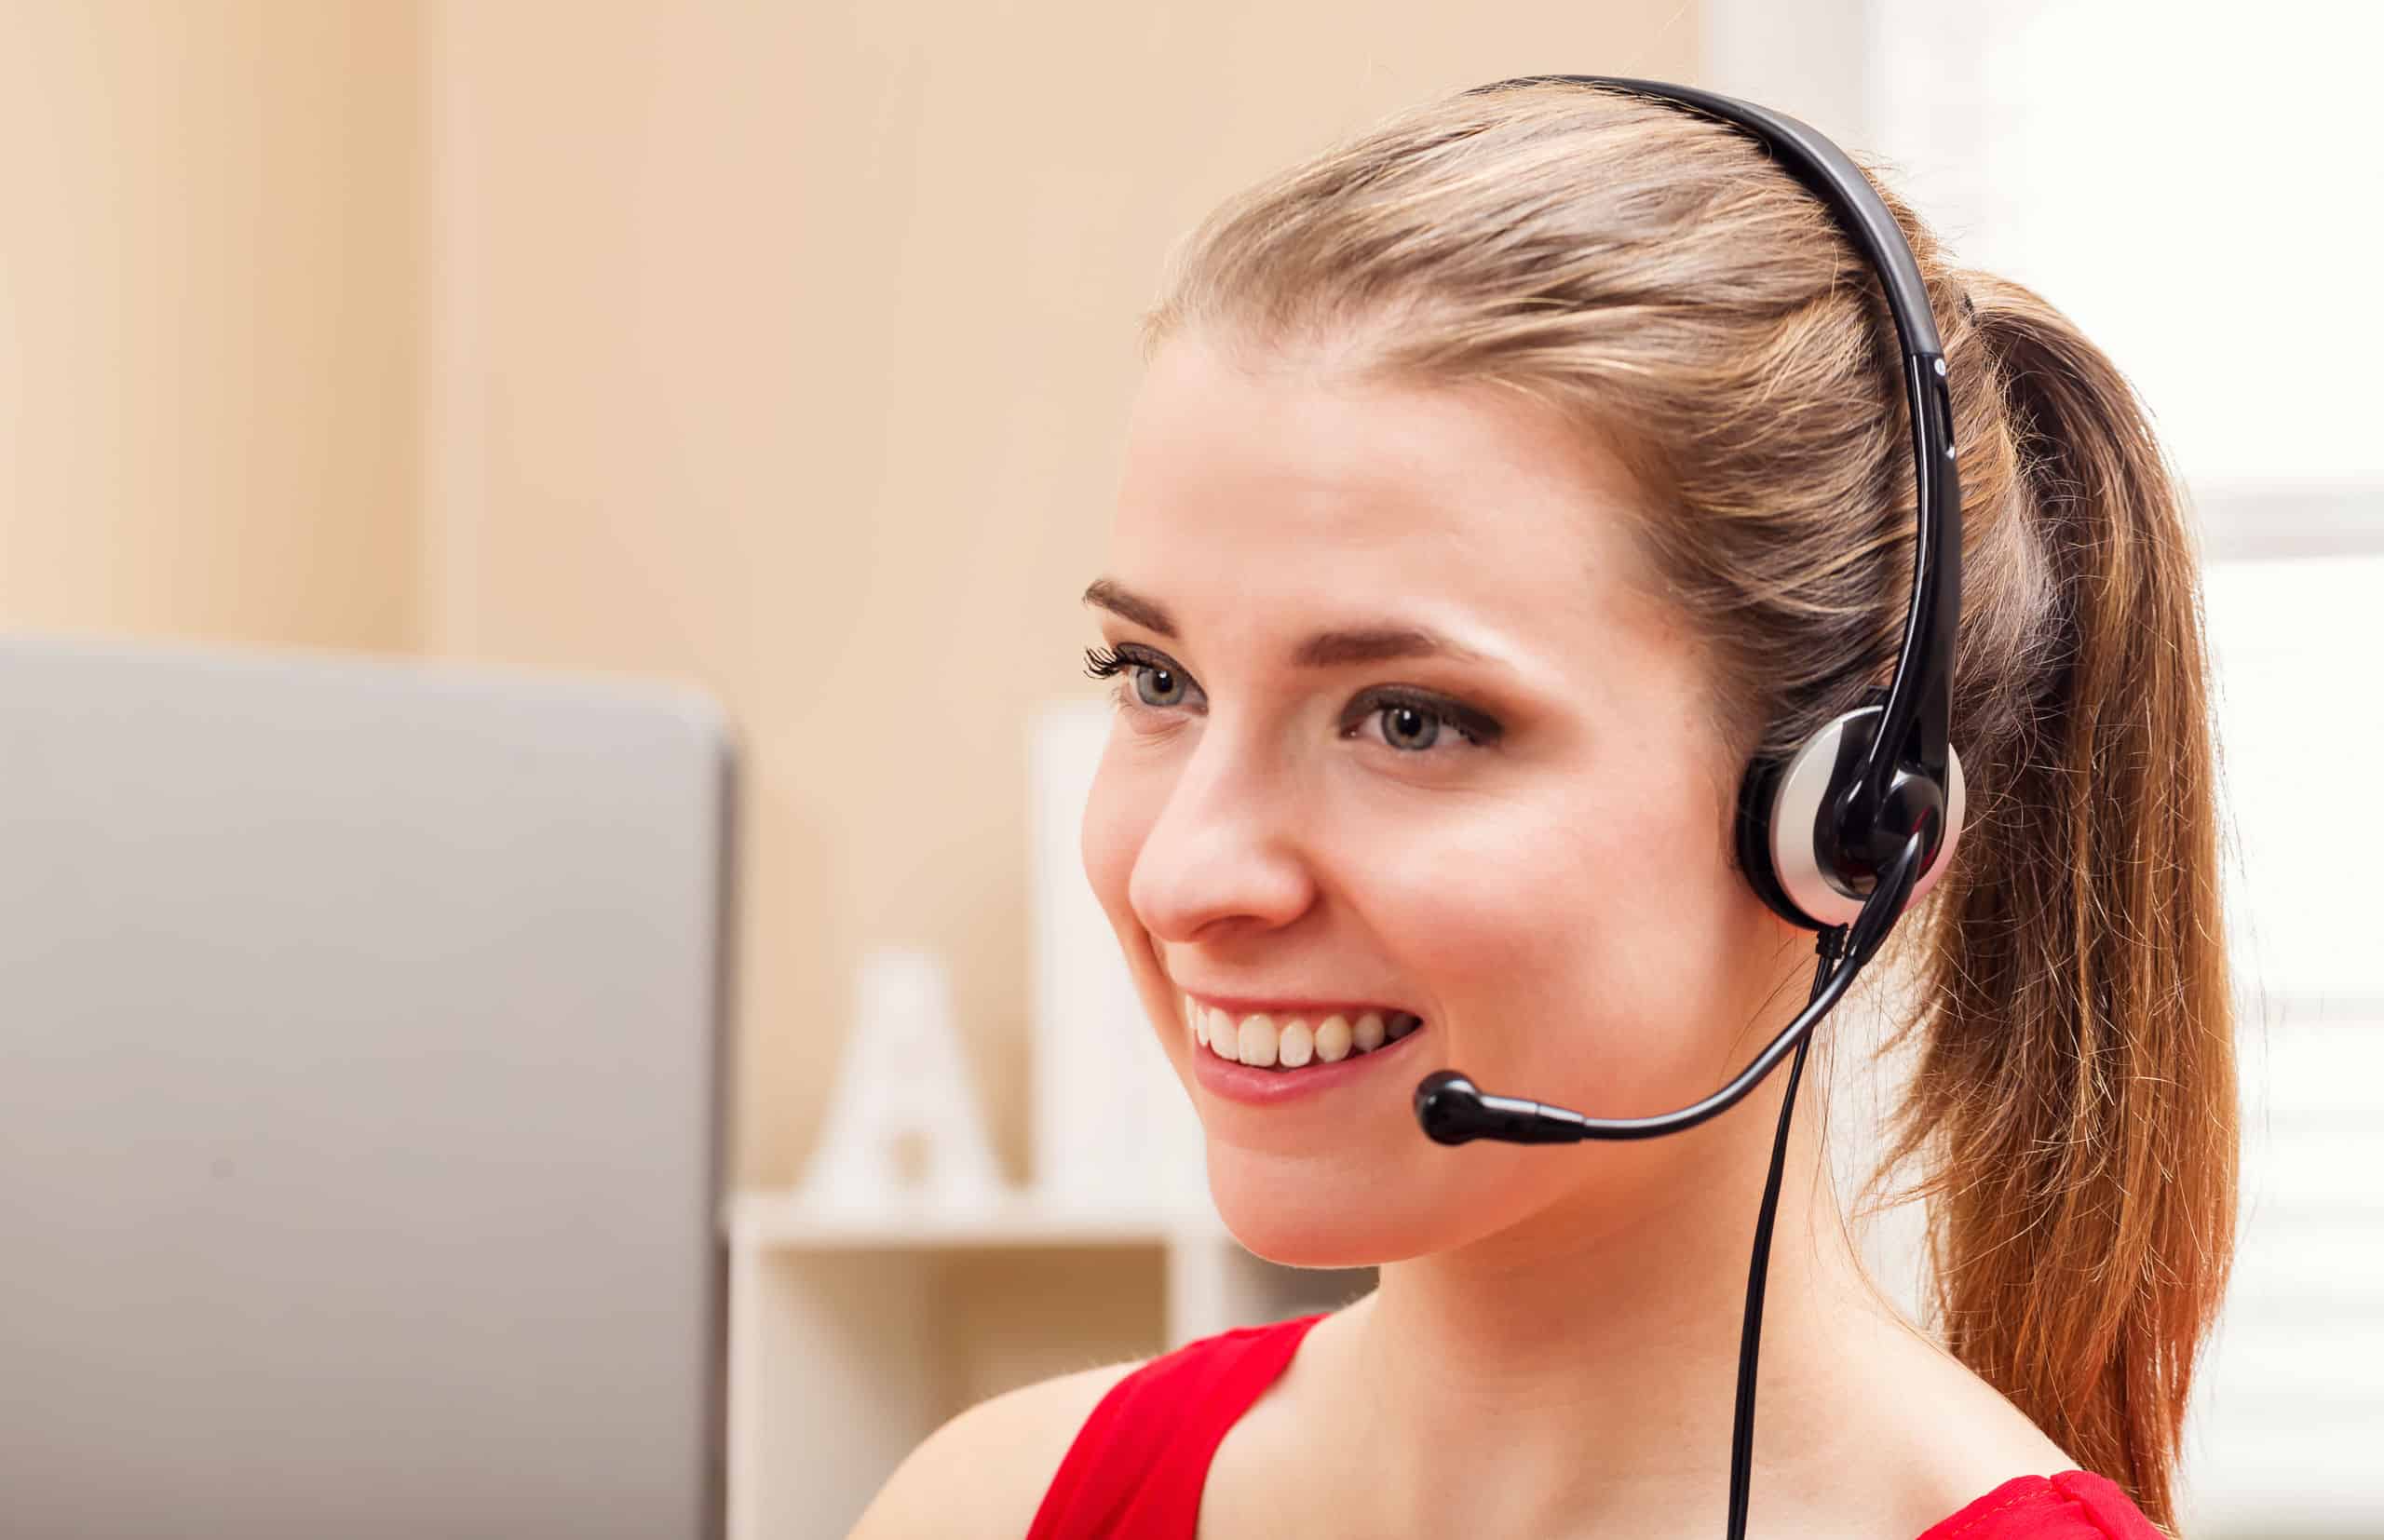 Work at Home Customer Service Jobs with AnswerFirst